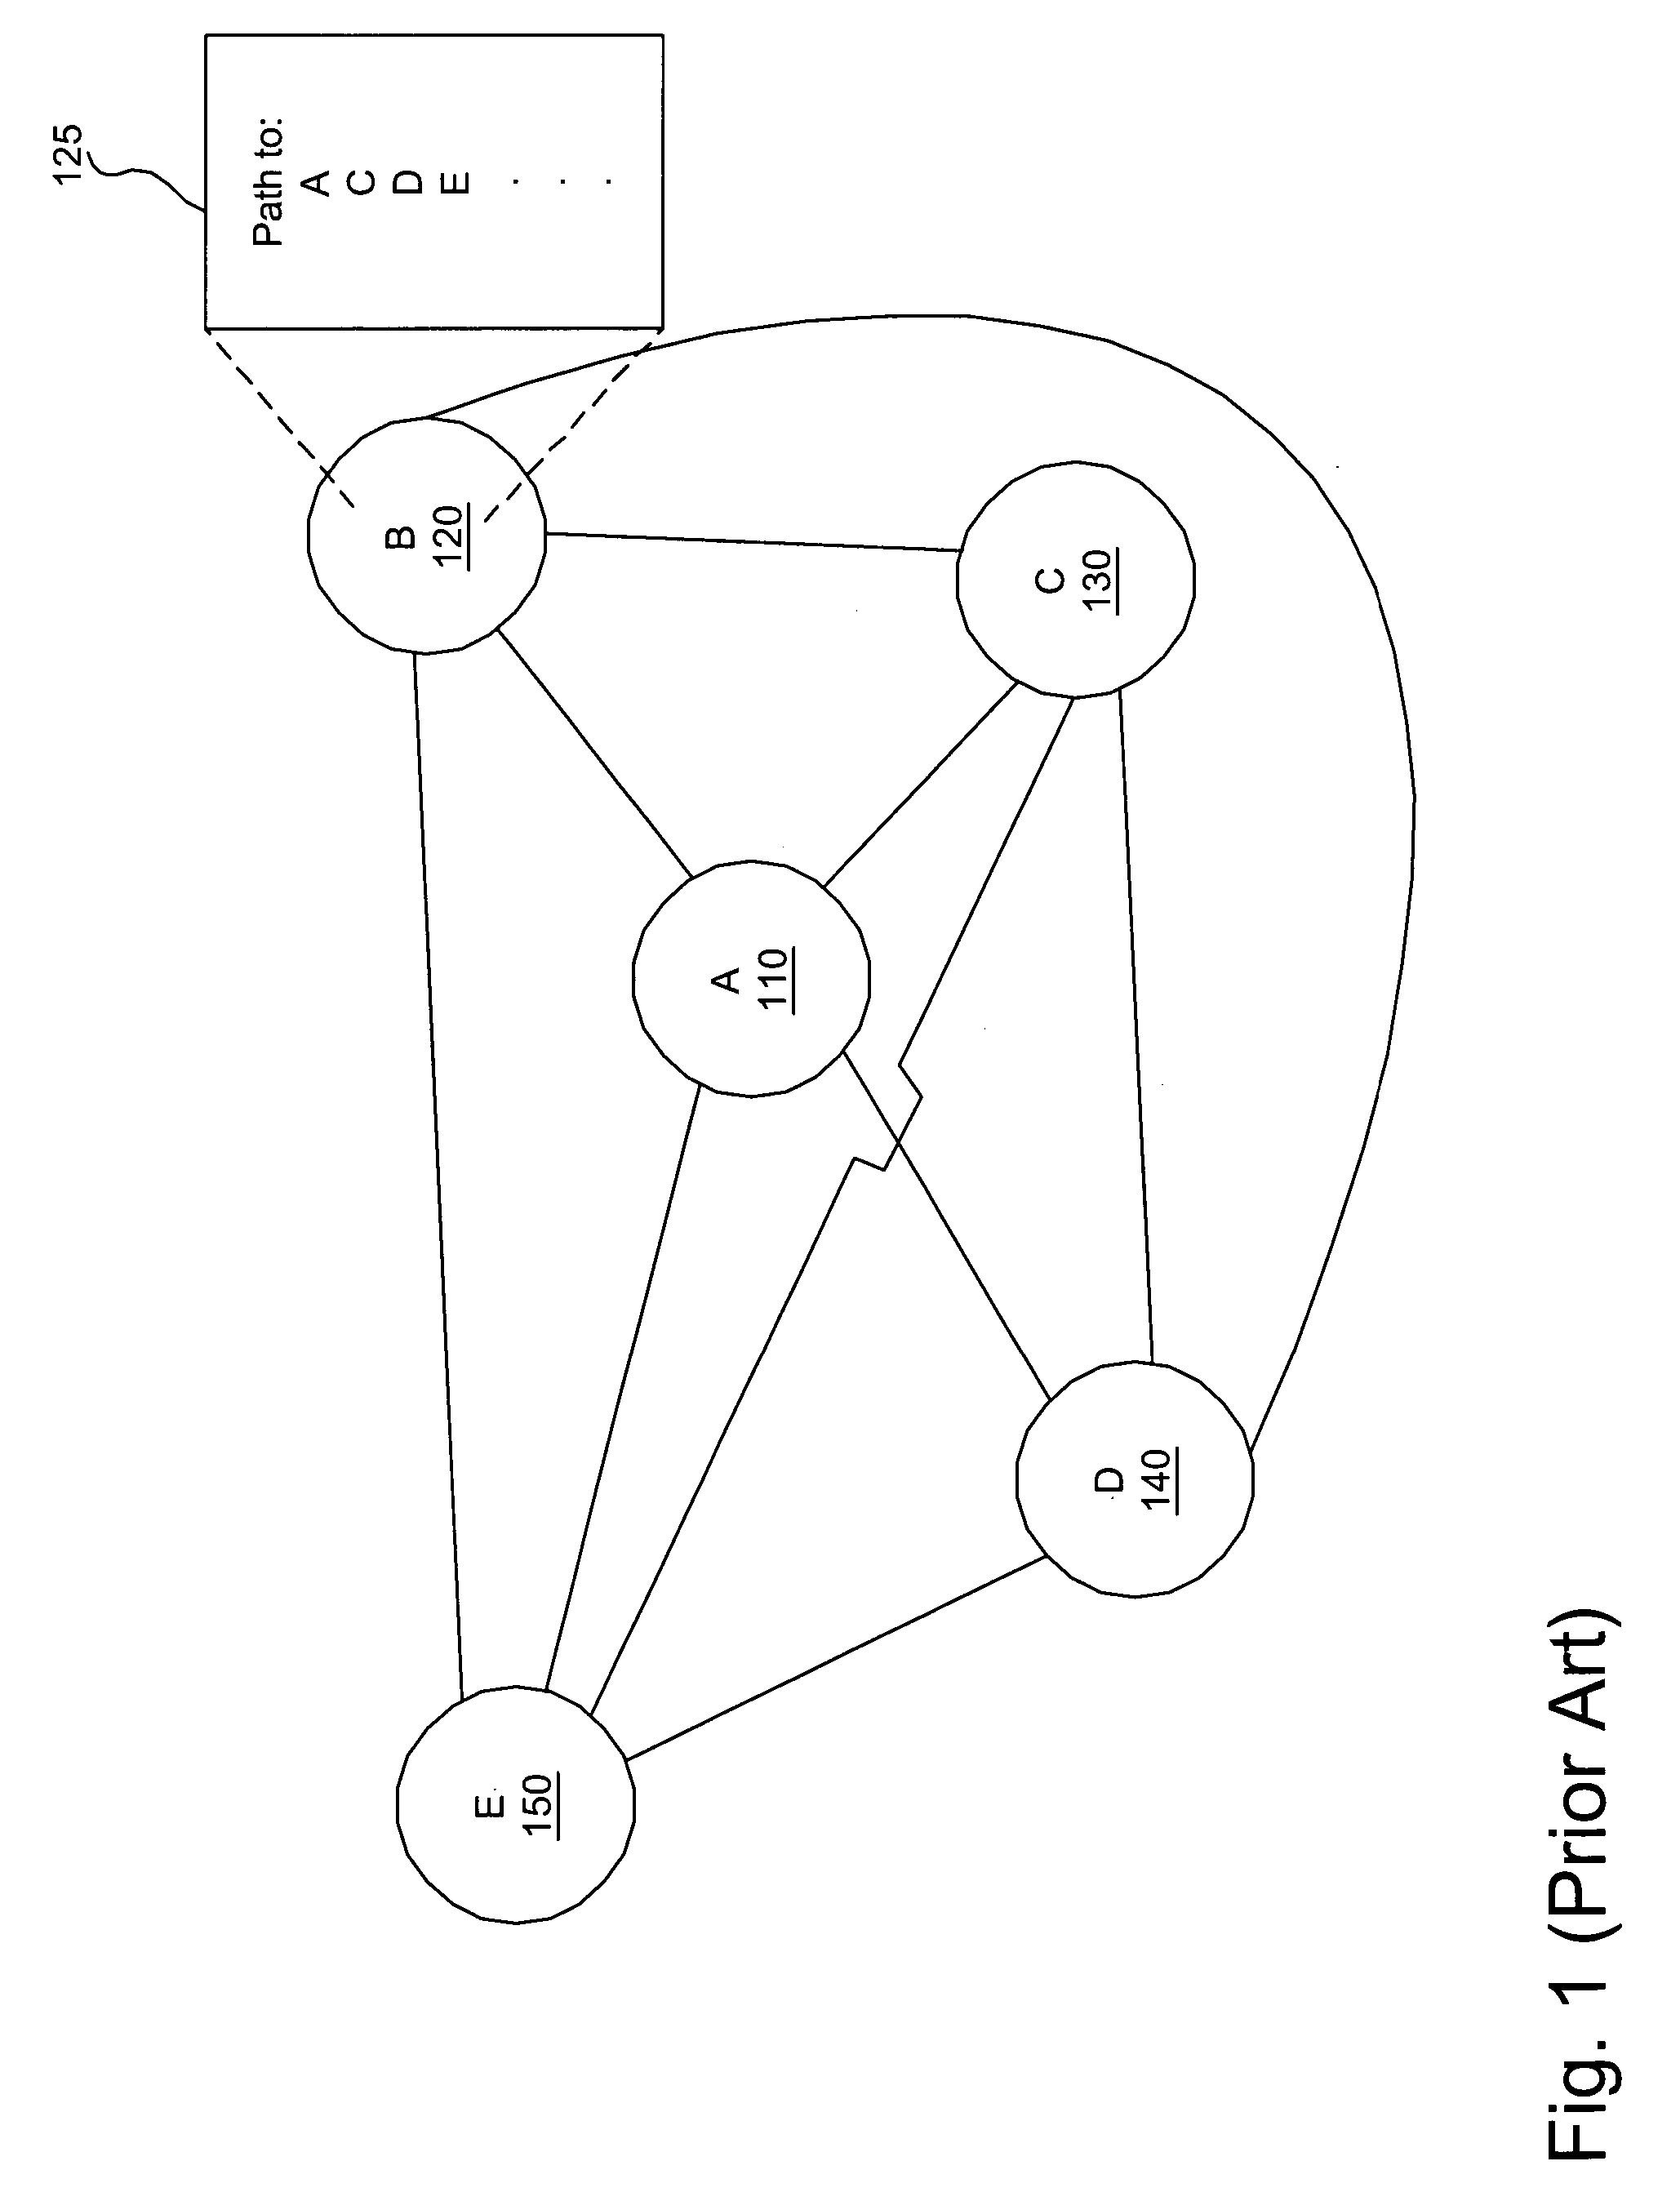 Selection of routing paths based upon path quality of a wireless mesh network